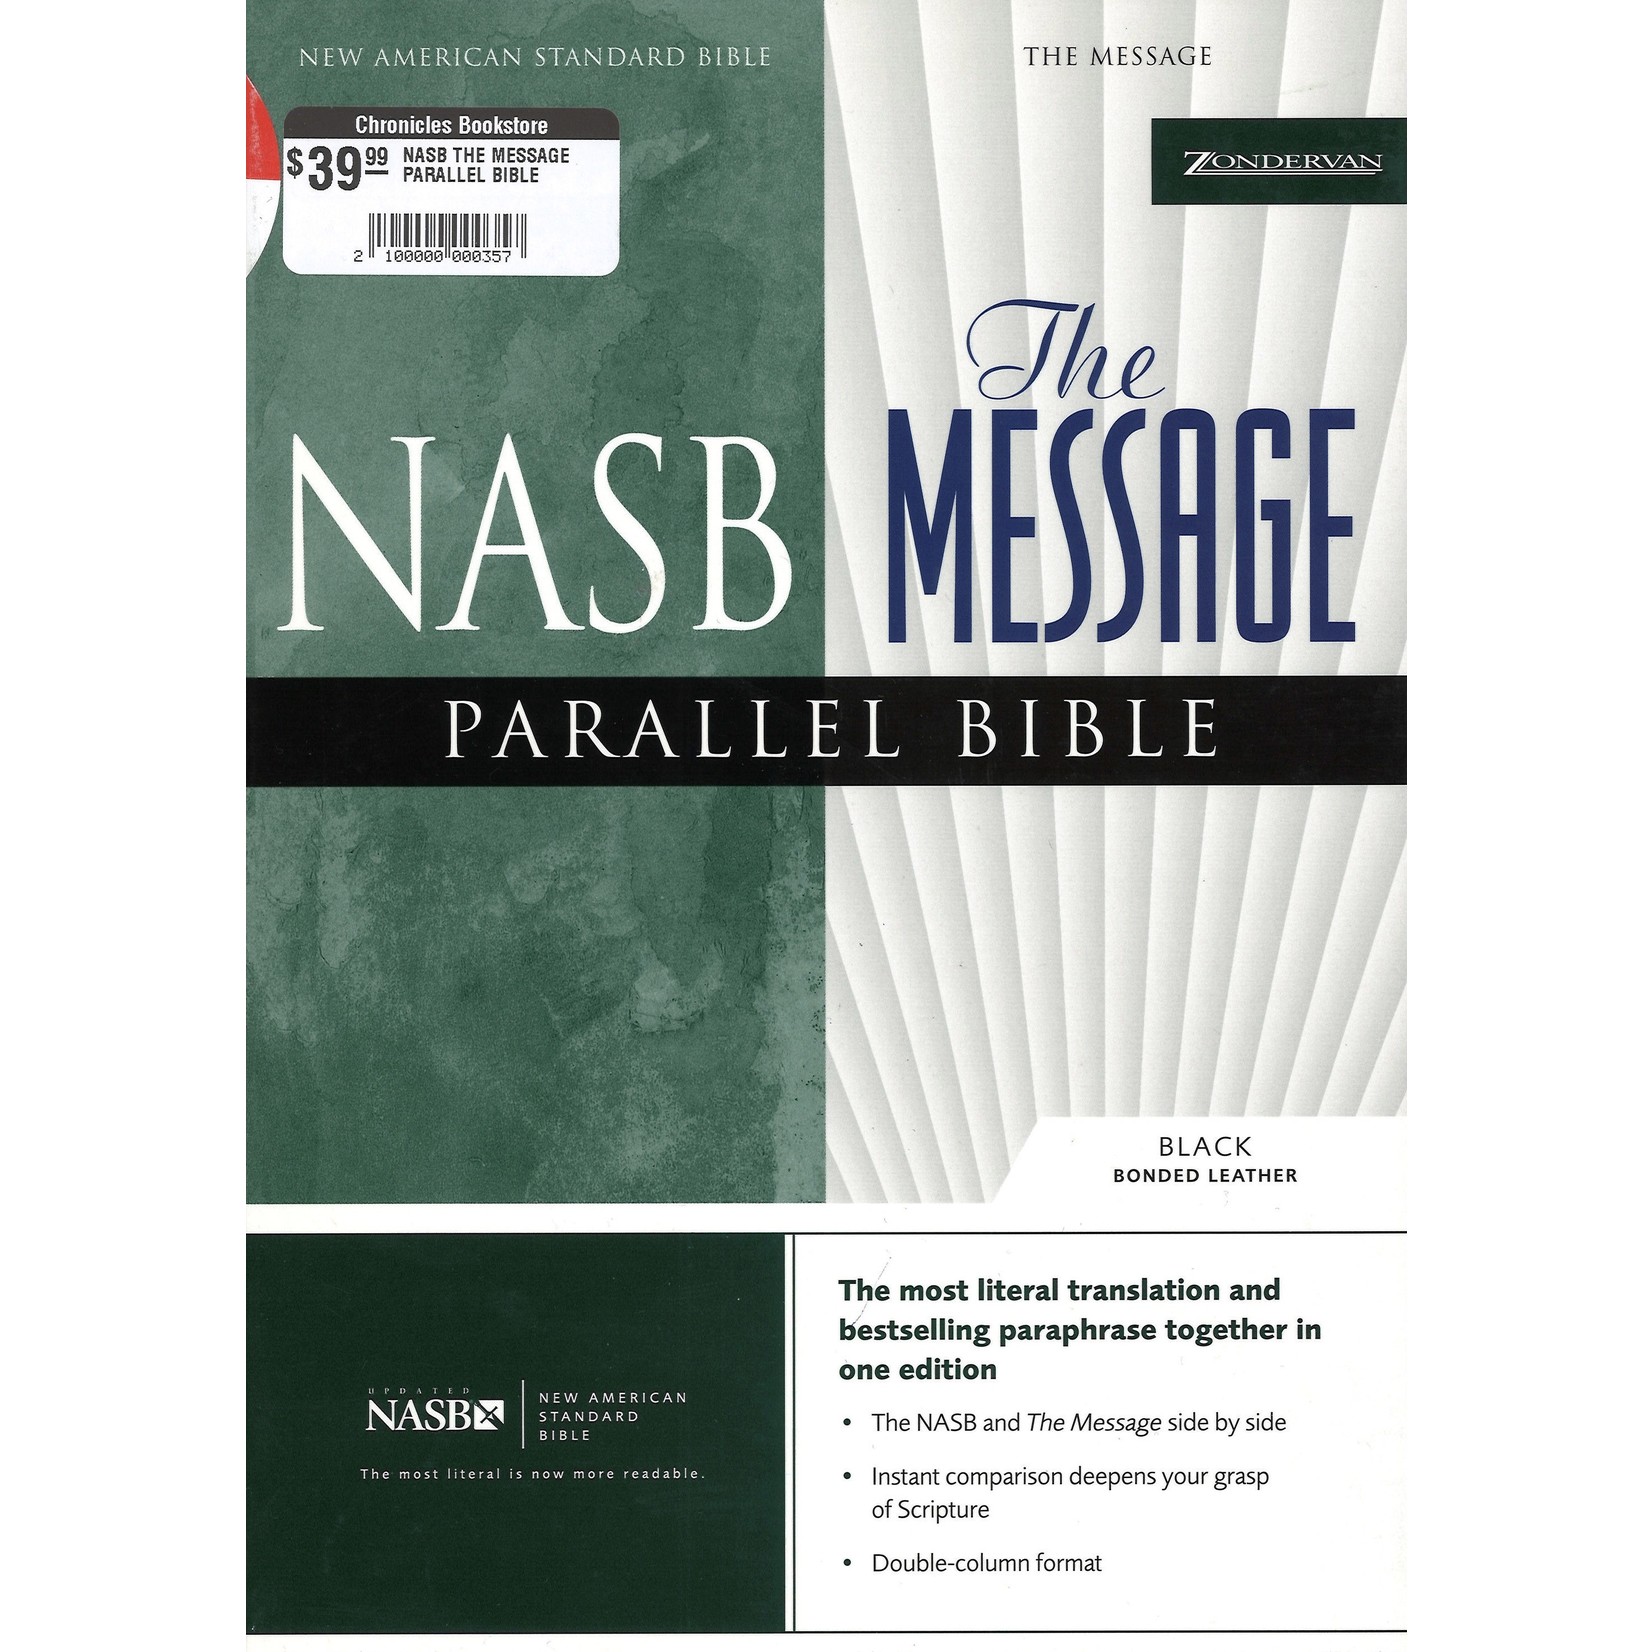 NASB THE MESSAGE PARALLEL BIBLE